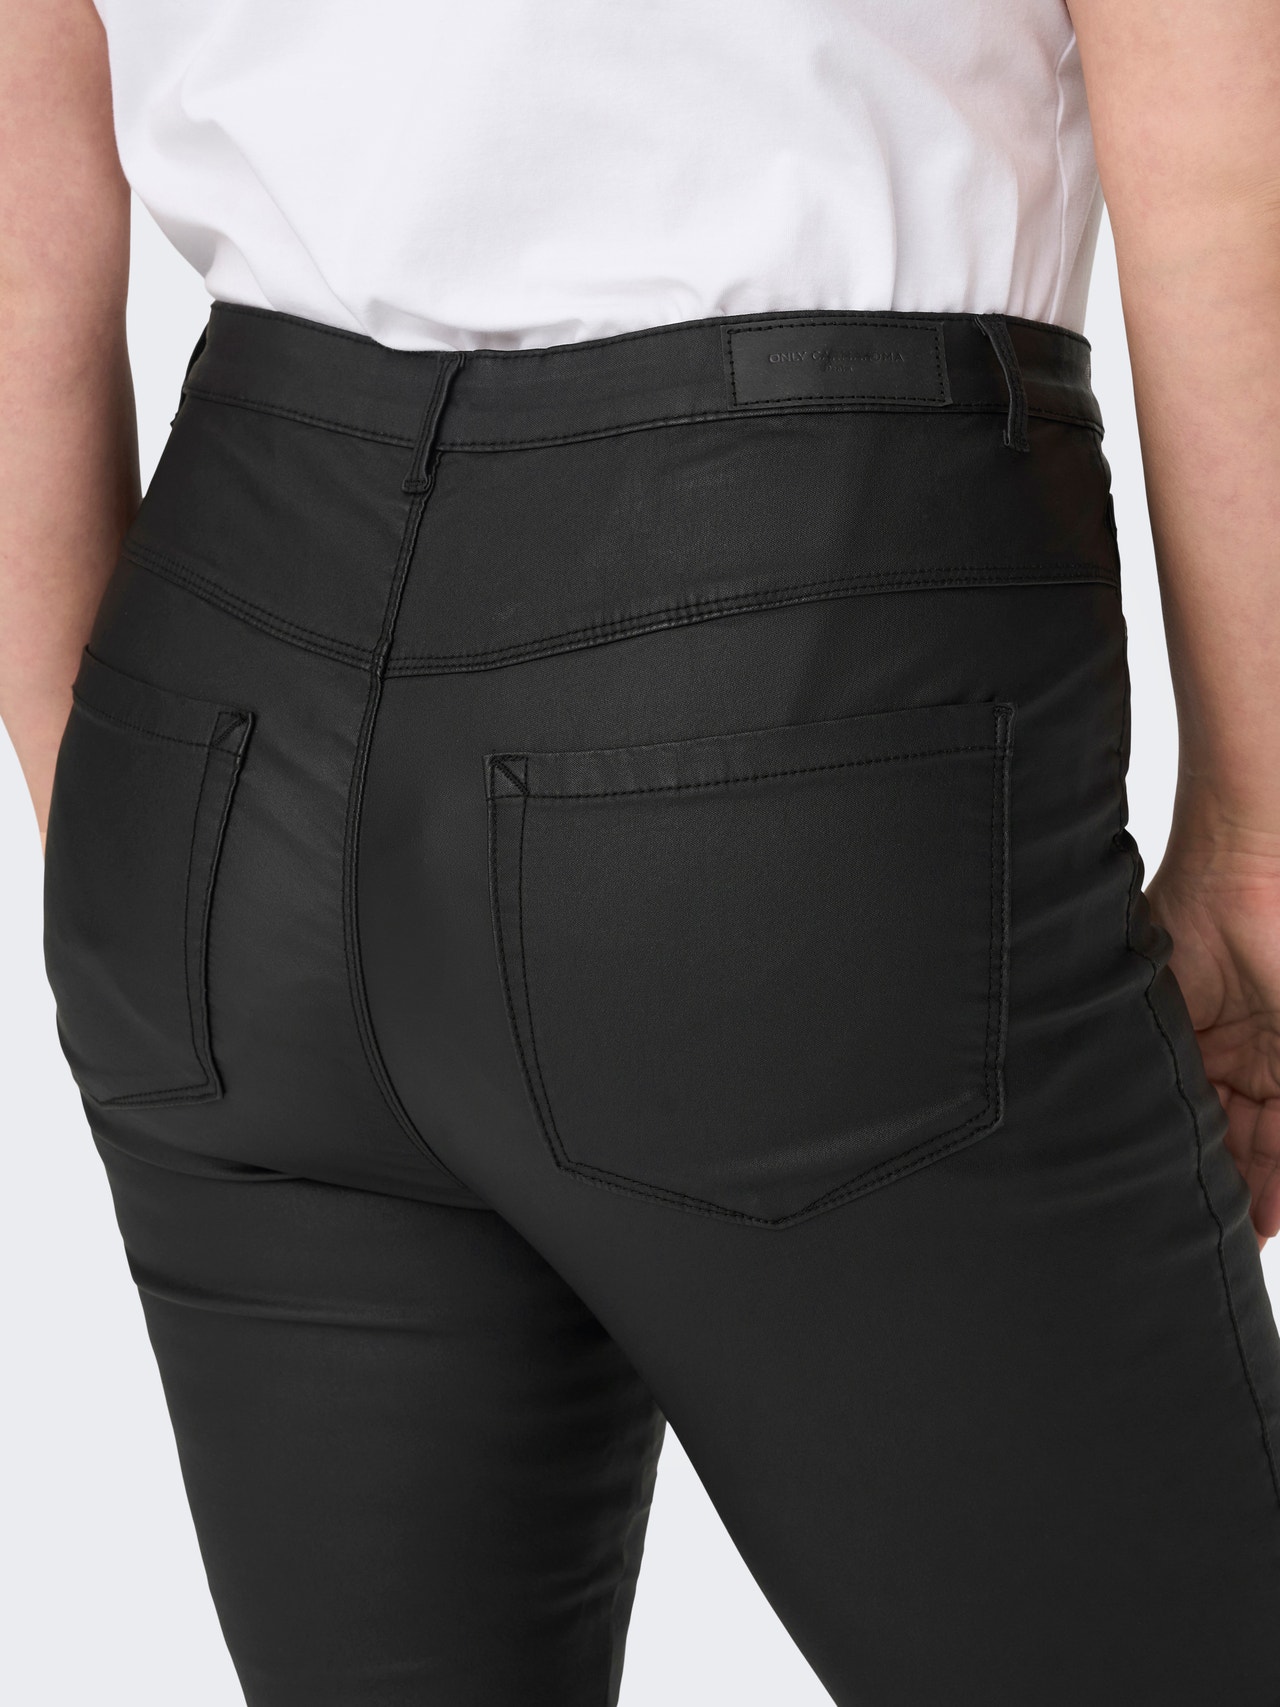 ONLY Curvy Flared coated pants -Black - 15288786